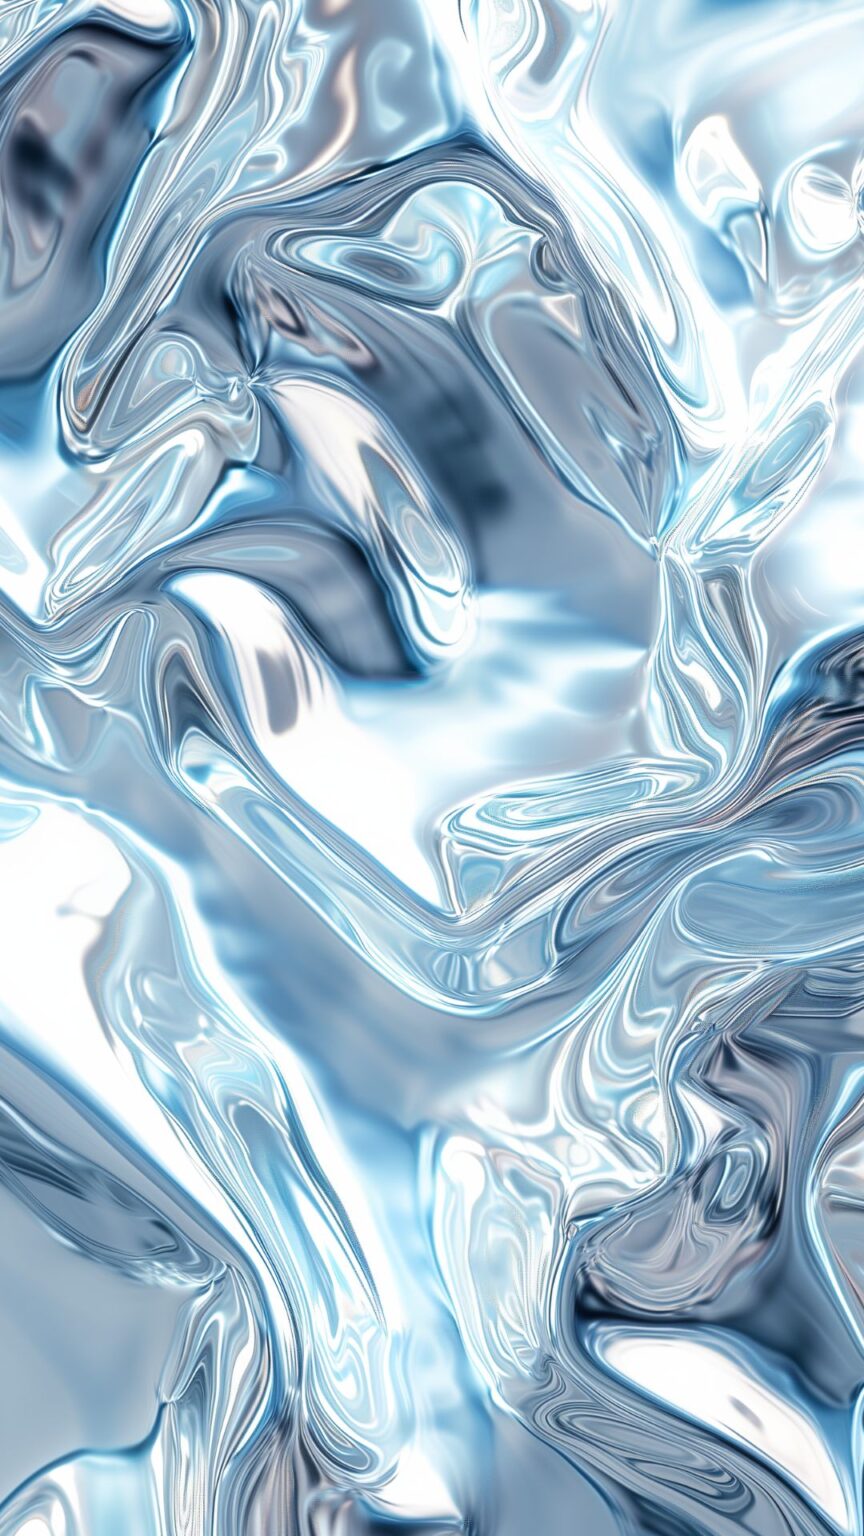 21 Gorgeous Iridescent iPhone Wallpapers That Turn Your Screen into Eye ...